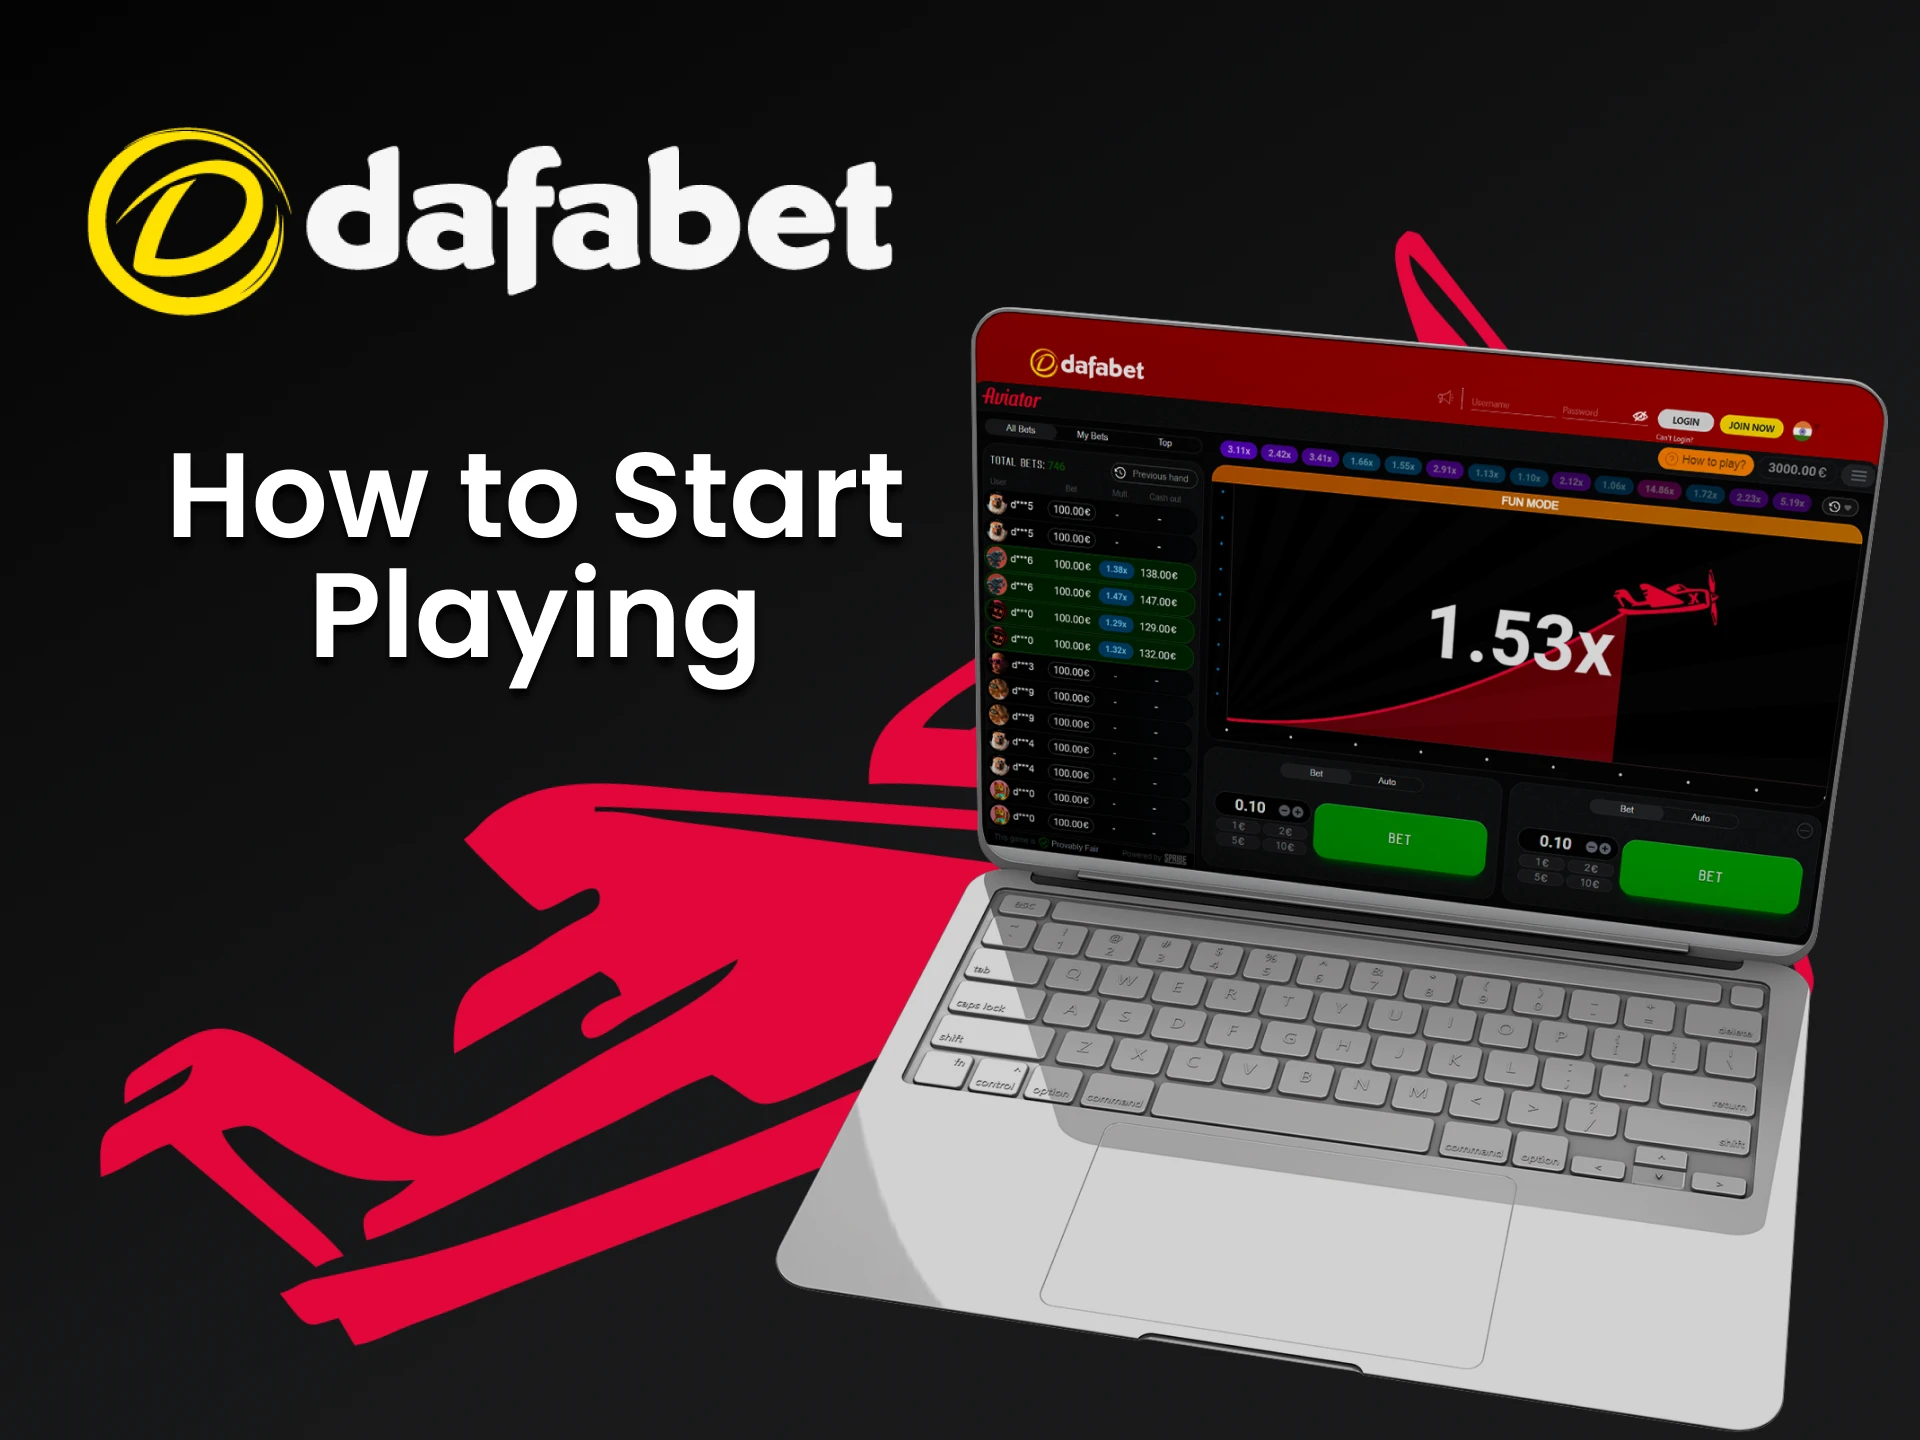 Follow the instructions to start playing Aviator by Dafabet.